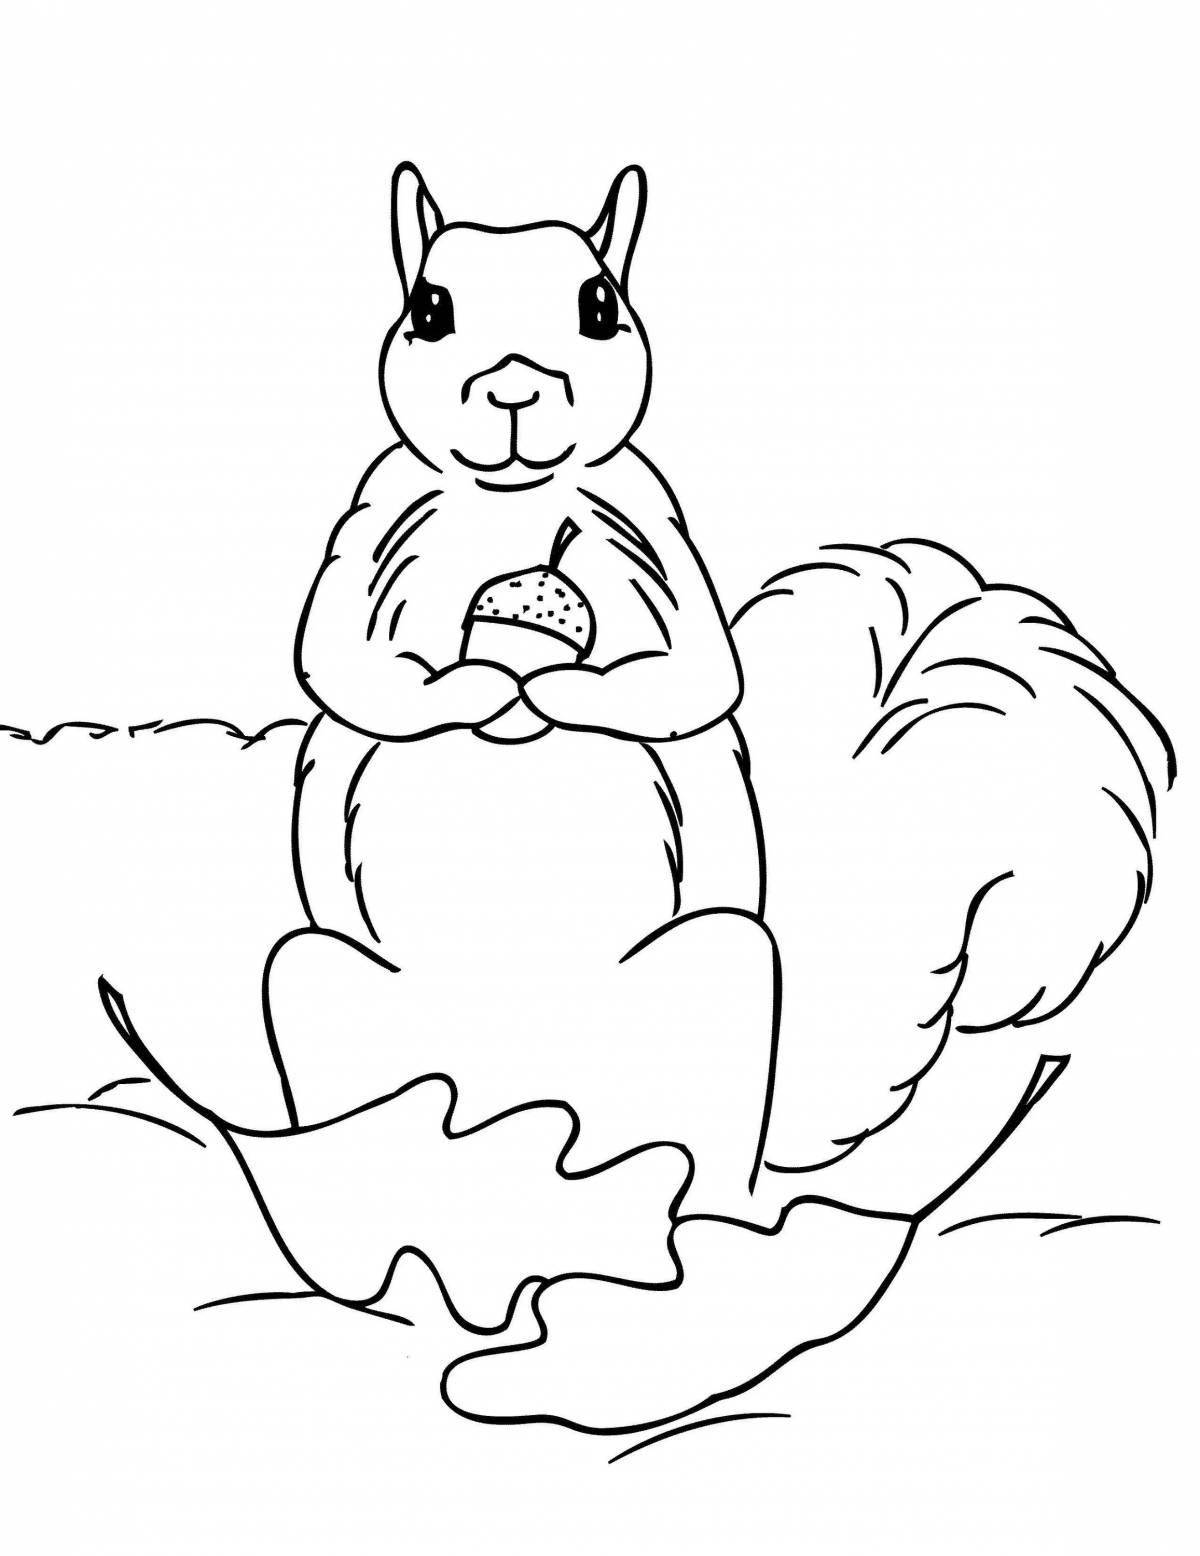 Bright drawing of a squirrel